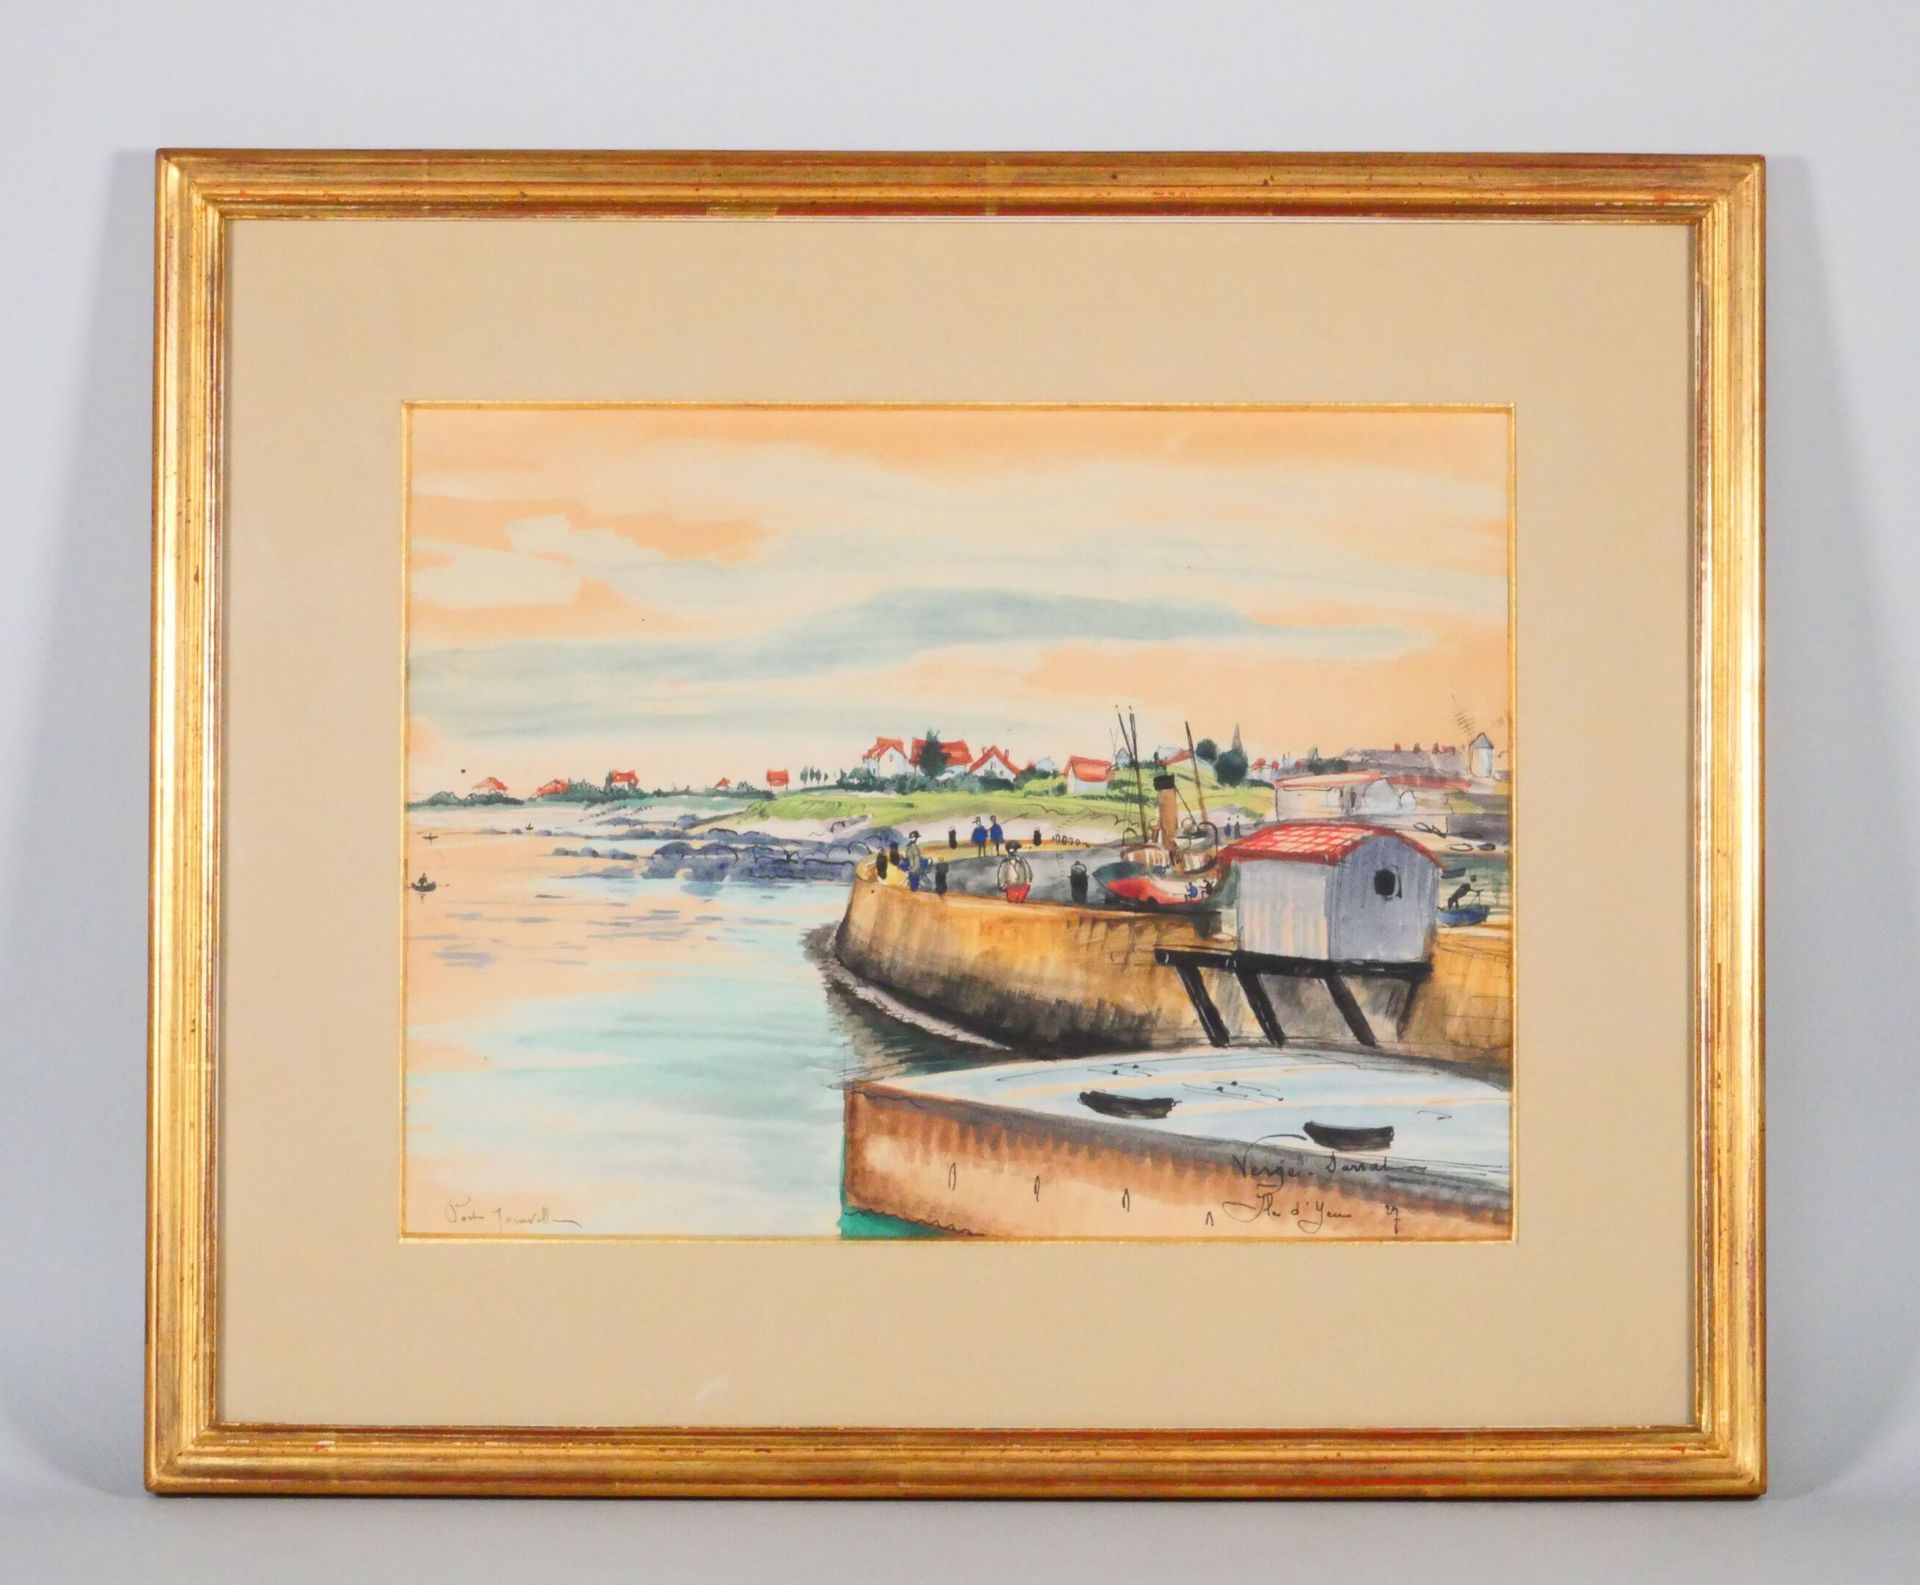 Null Henri VERGÉ-SARRAT (1880-1966)
Port Joinville on Yeu Island
Watercolor and &hellip;